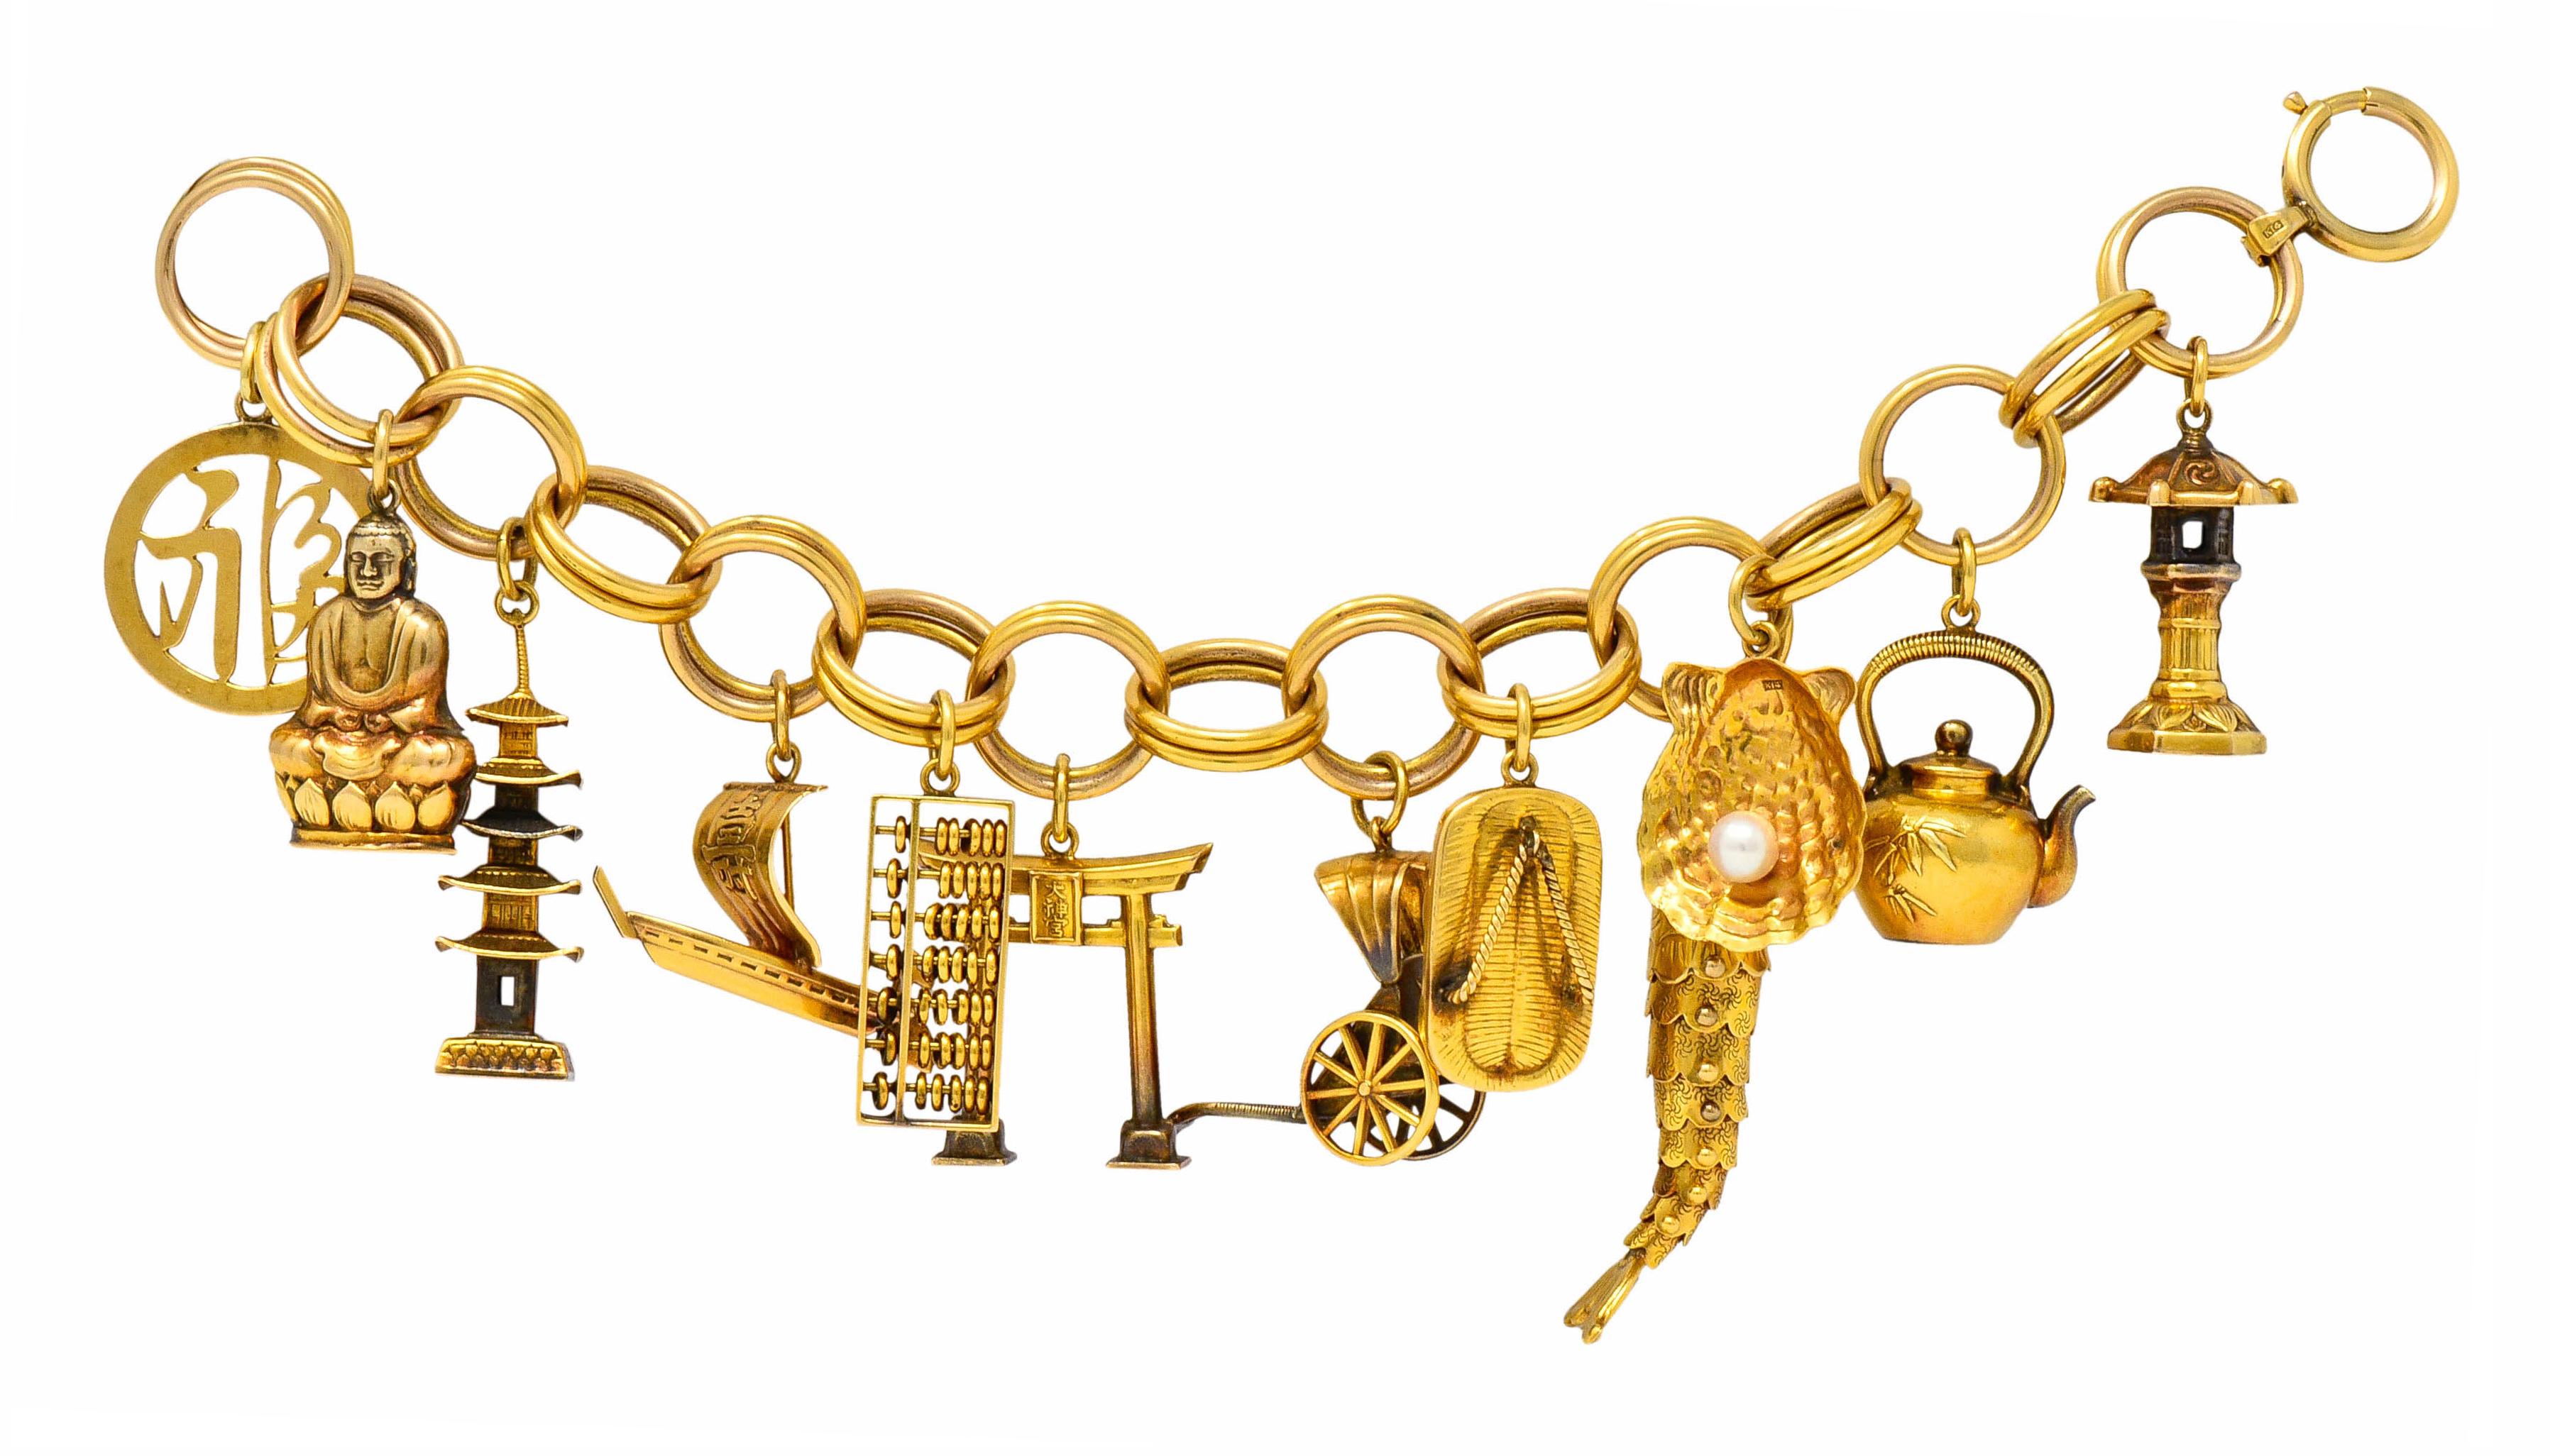 Charm bracelet is comprised of large round links, doubled

Suspending twelve large charms of Japanese icons

Circular character, Buddha, pagoda tower, wasen sailboat, abacus, Torii gate, rickshaw carriage, waraji sandle, articulated fish, shell with